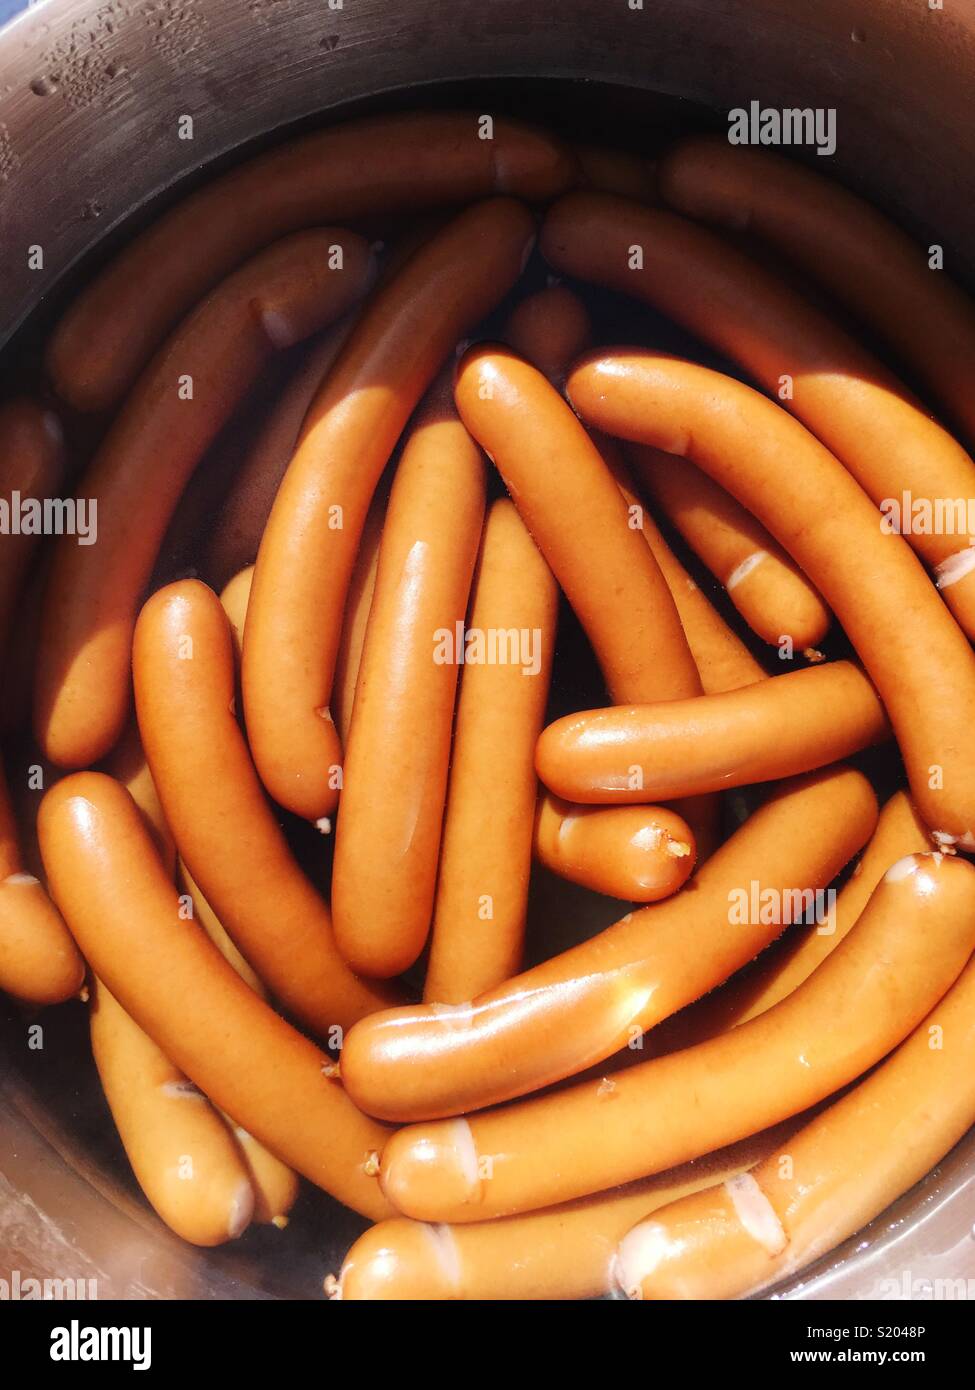 A pot full of weiner sausages Stock Photo